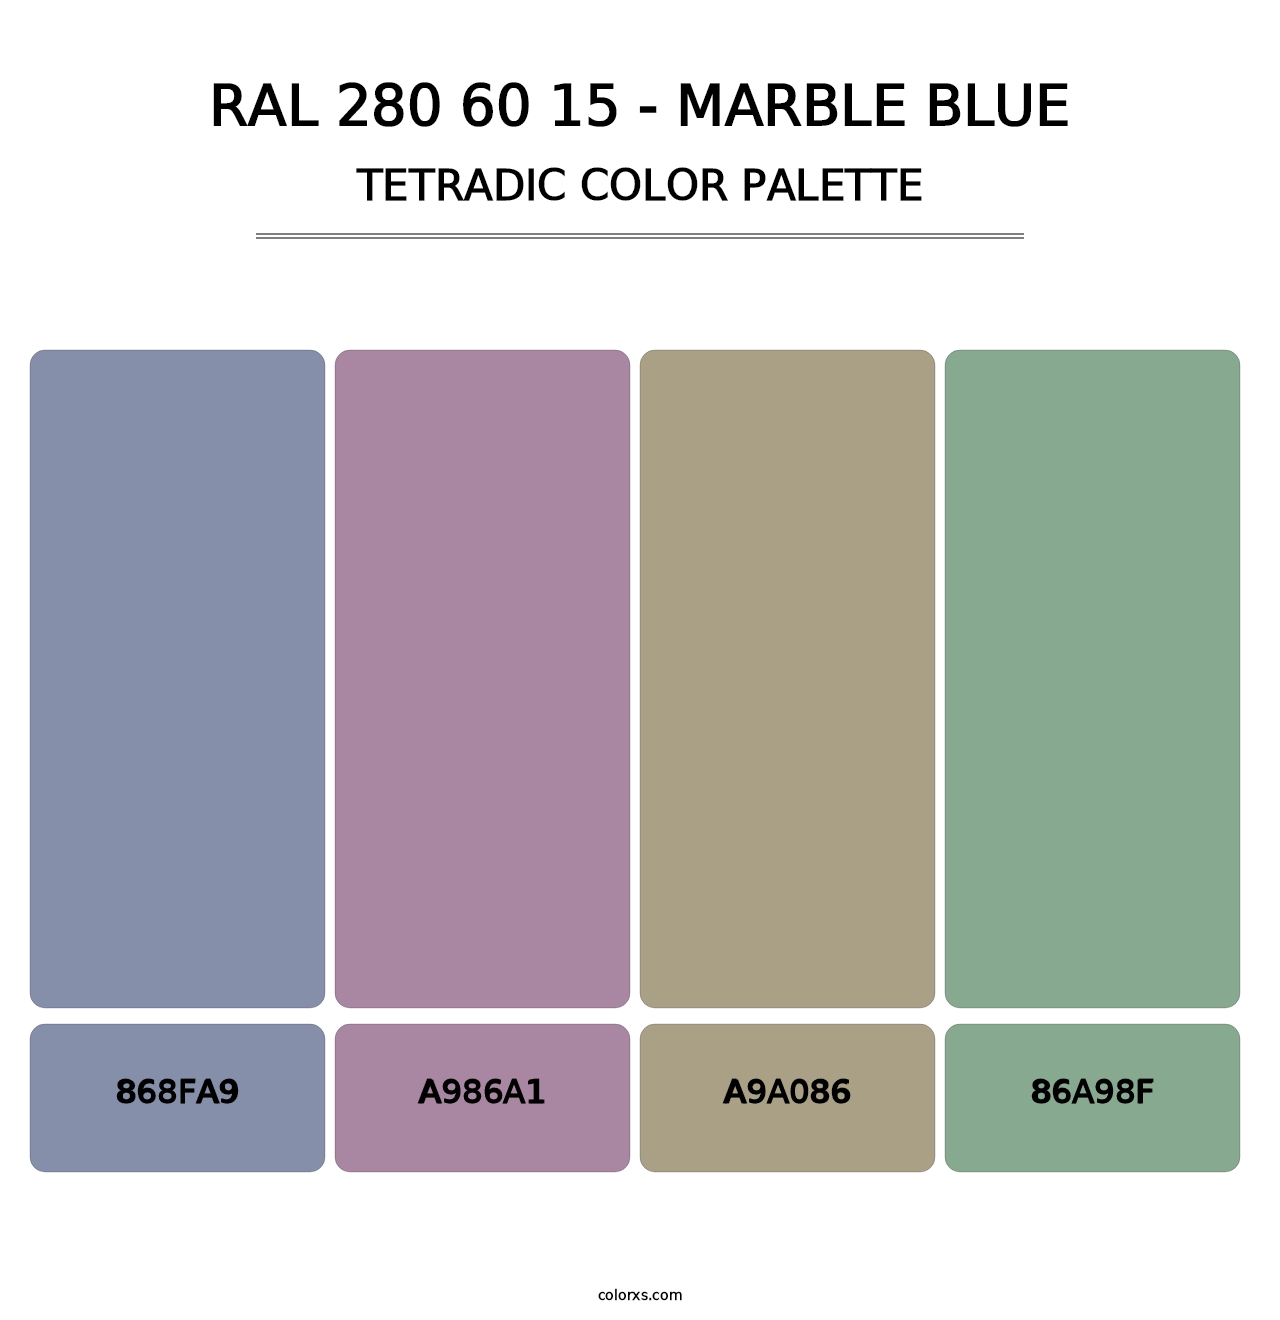 RAL 280 60 15 - Marble Blue - Tetradic Color Palette